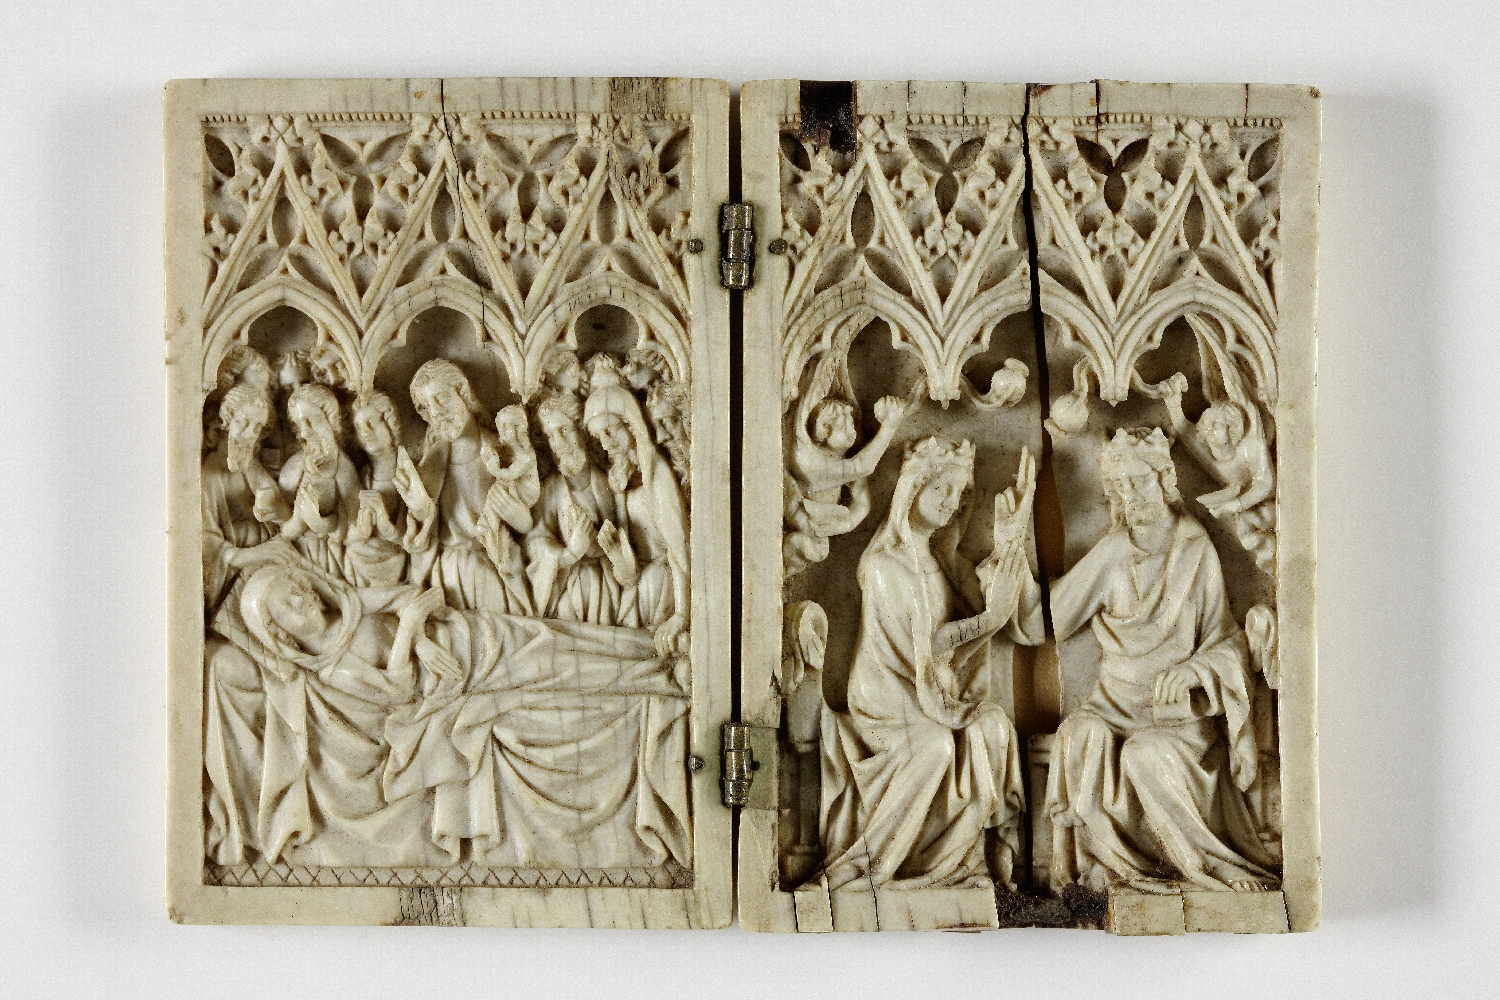 Diptych with portrayals of the Crowning of the Virgin Mary and Dormition of the Virgin, region of Maas or Central Rhine, ca. 1350, ivory, brass, inv. no. 20-32